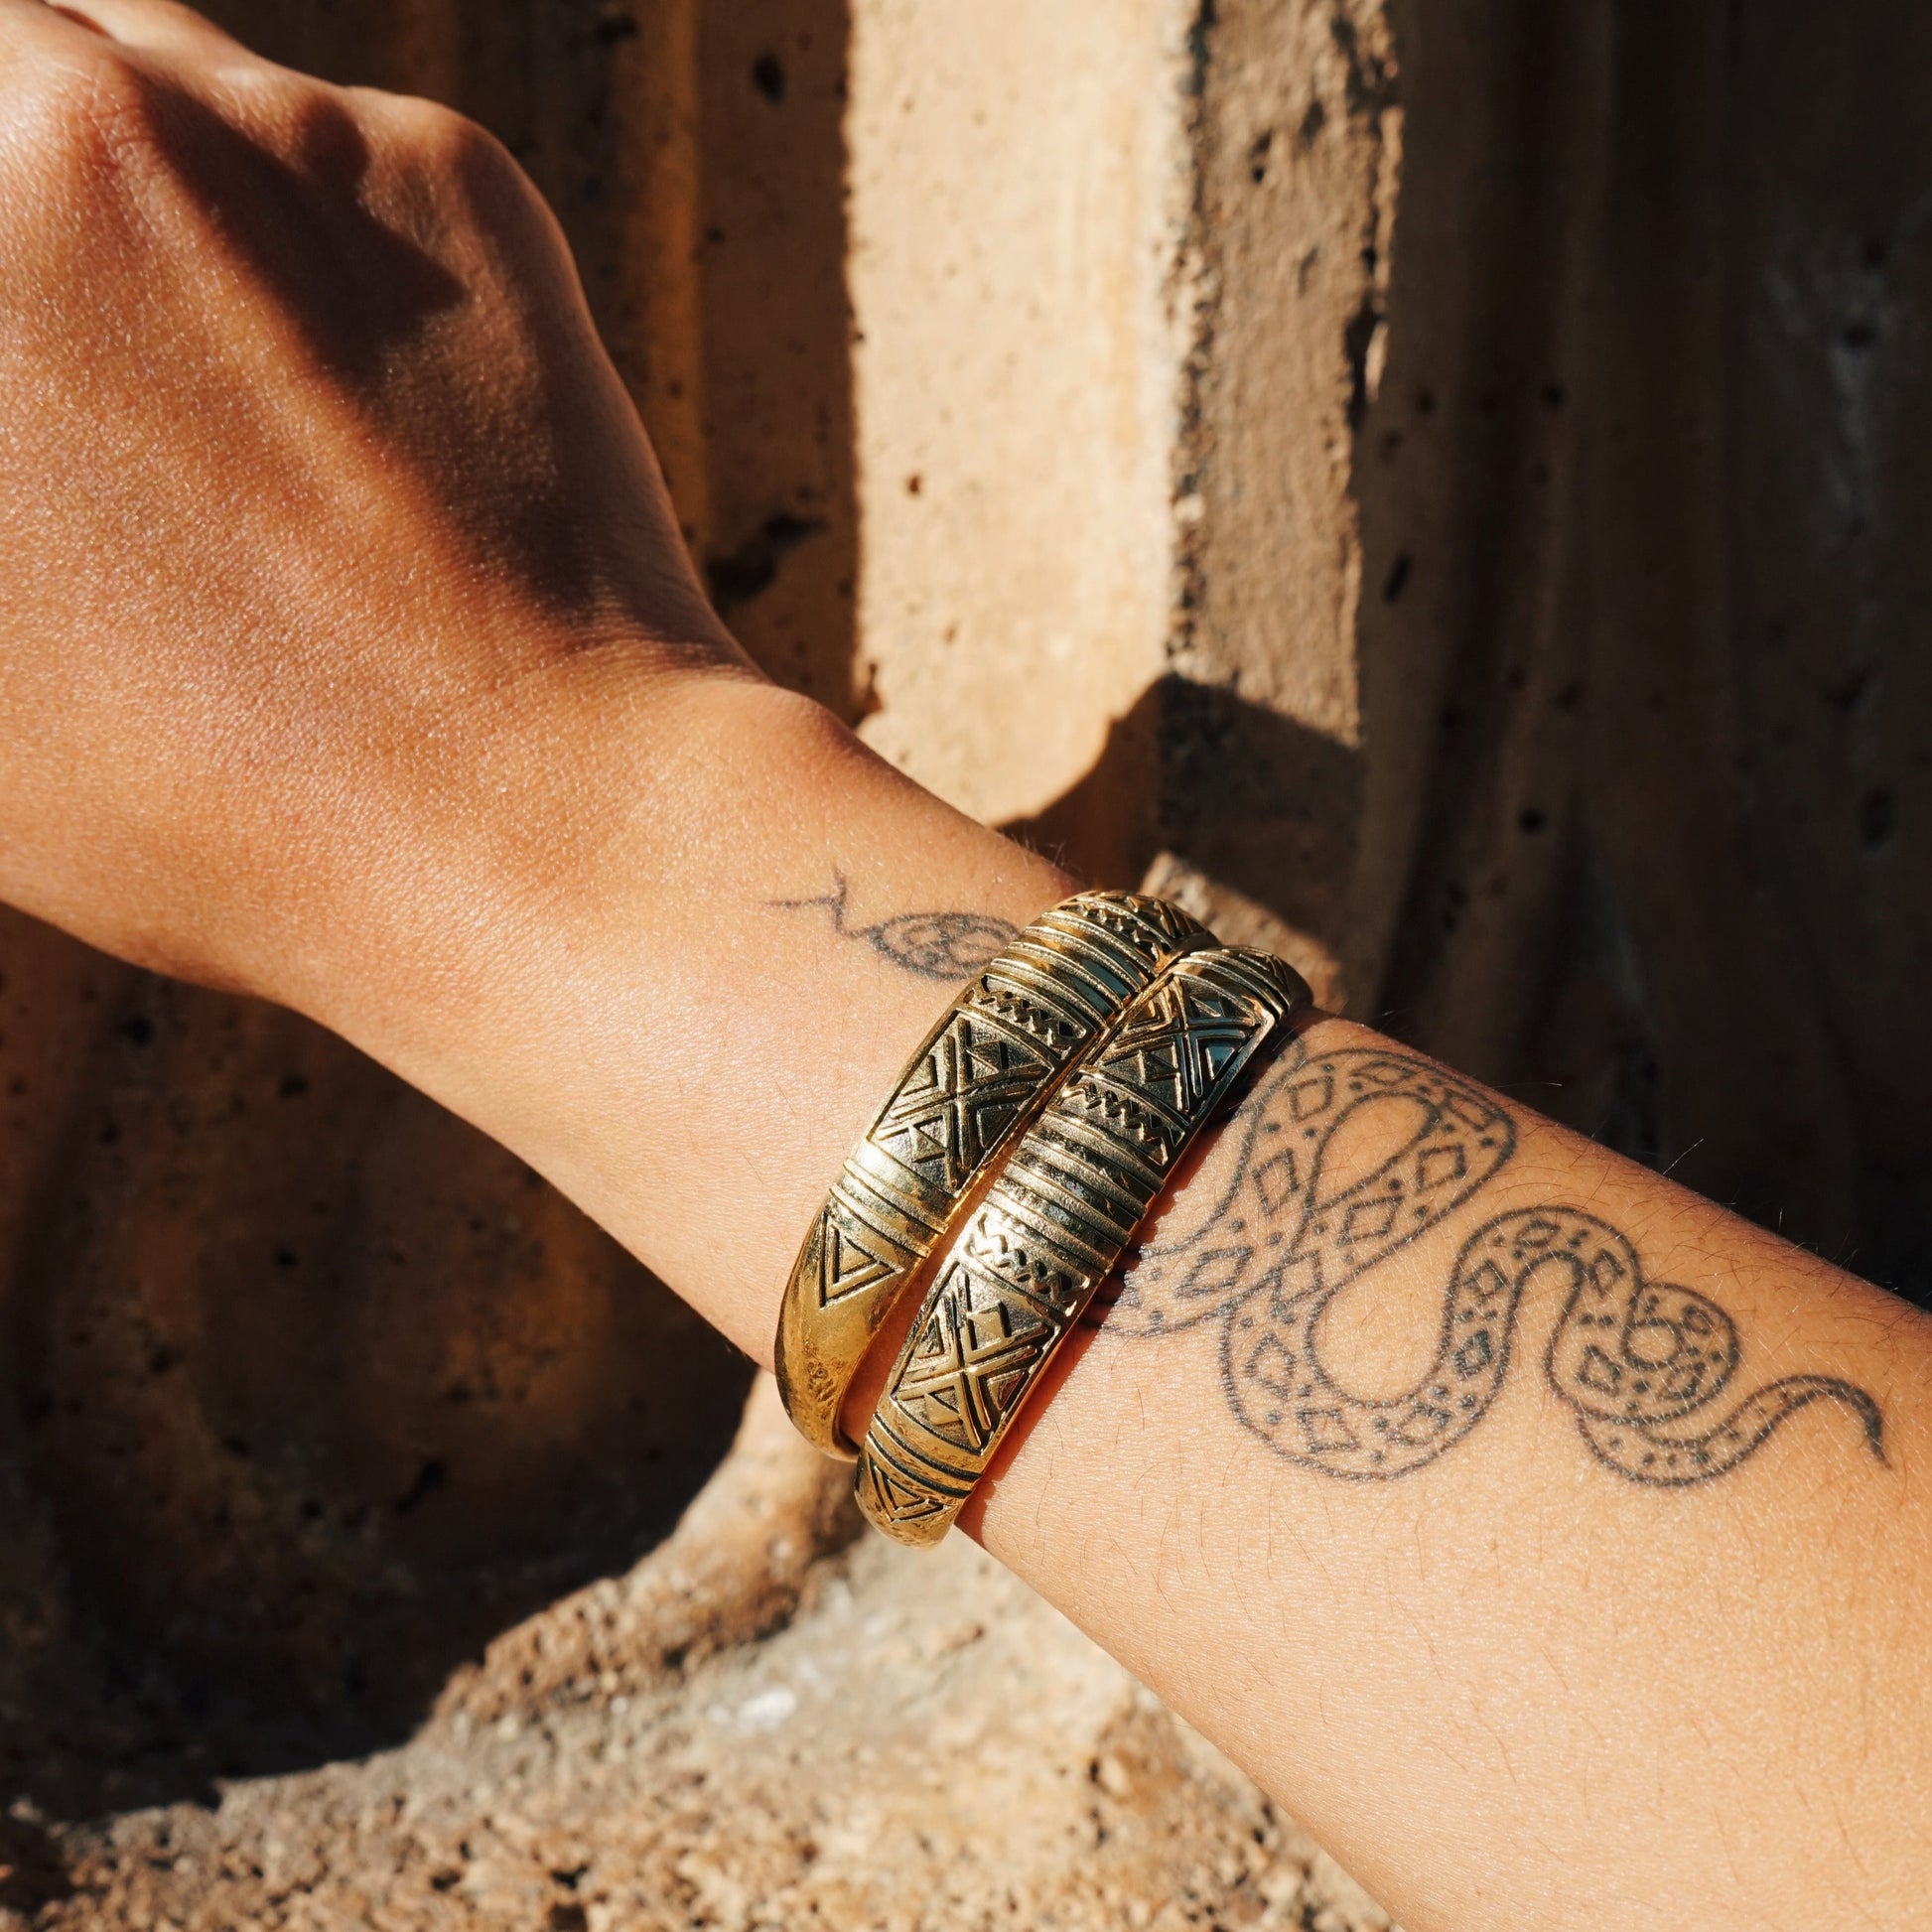 Brass Etched Cuffs on an arm with a snake tattoo